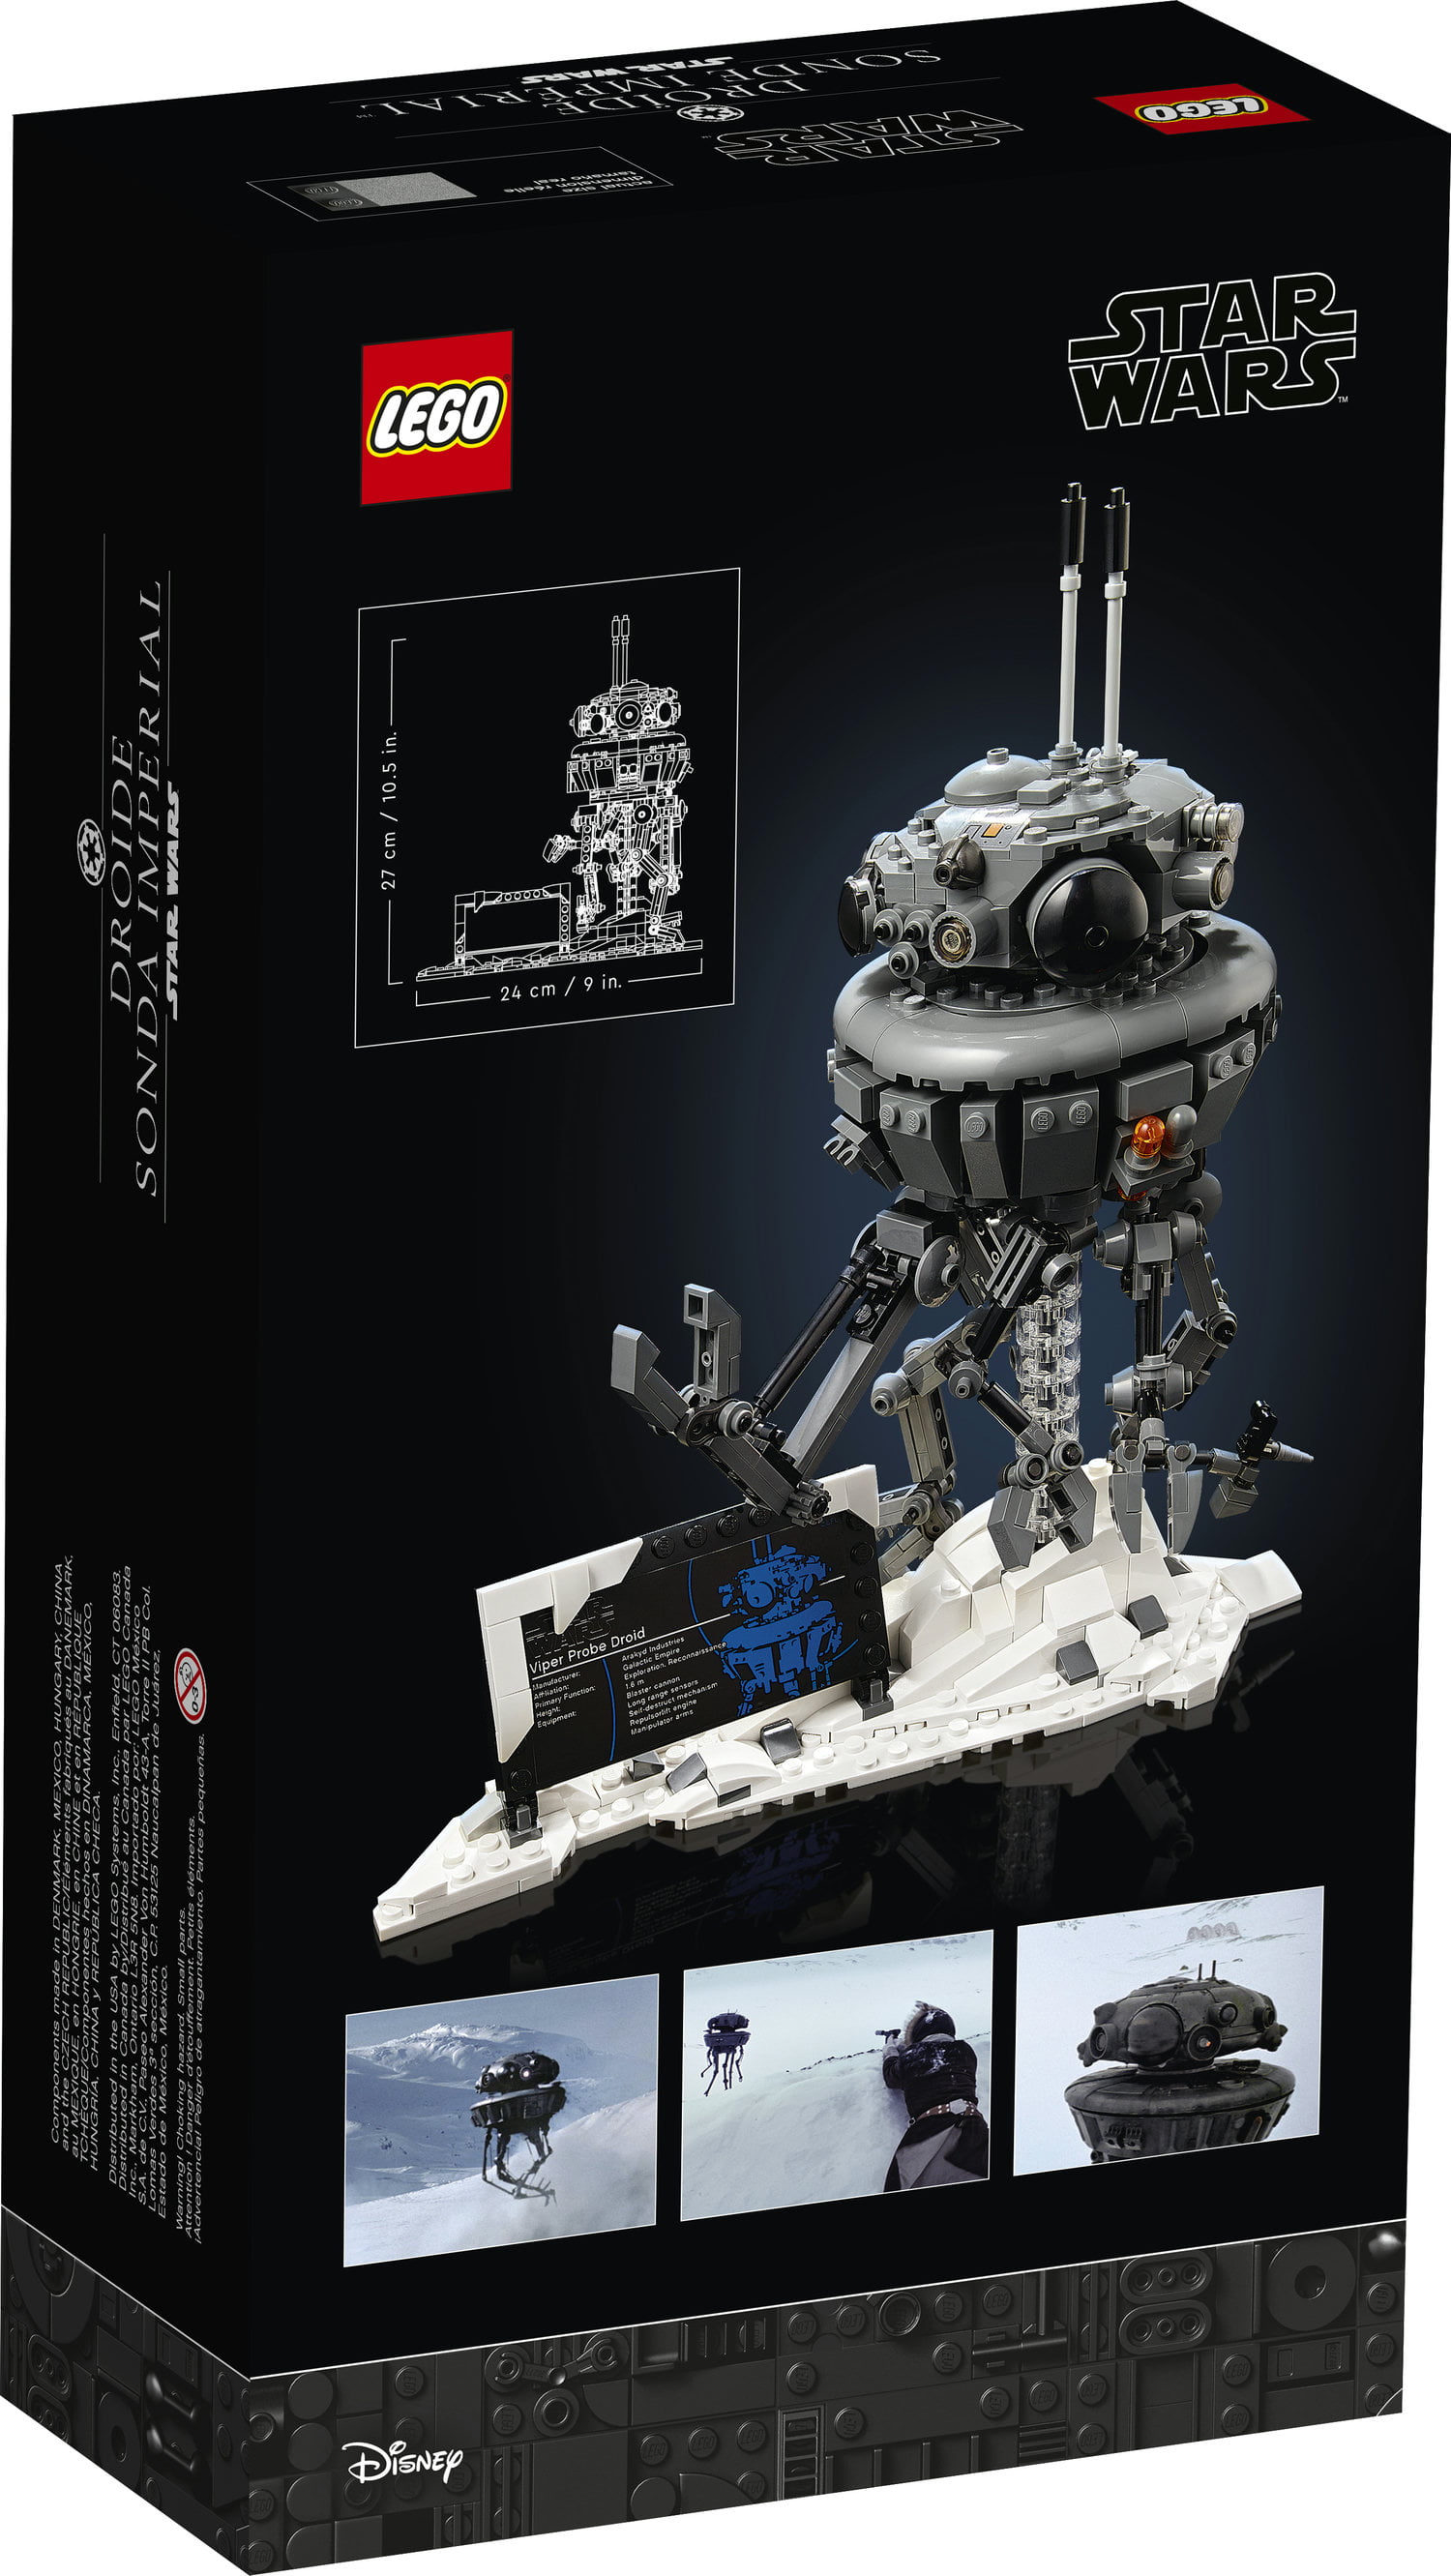 NEW LEGO Star Wars Imperial Probe Droid 75306 Building Toy 683 Pieces 